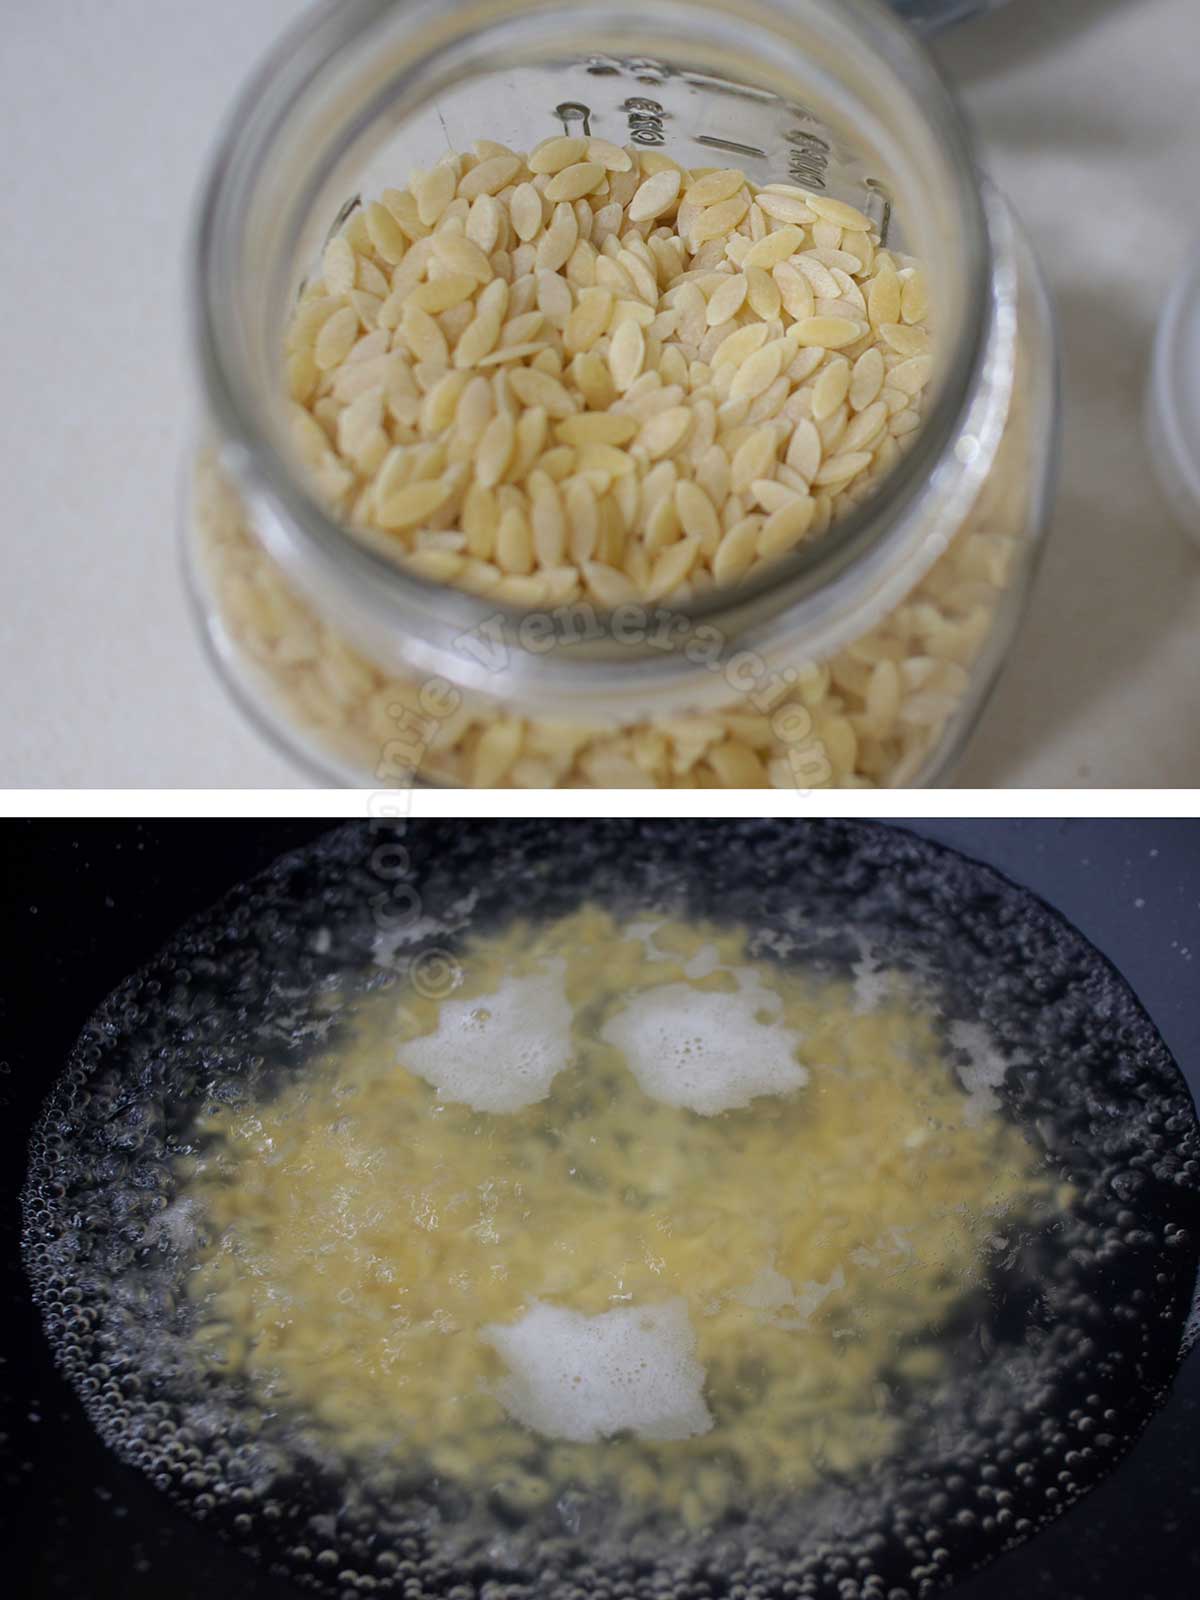 Boiling orzo (rissoni) in salted water